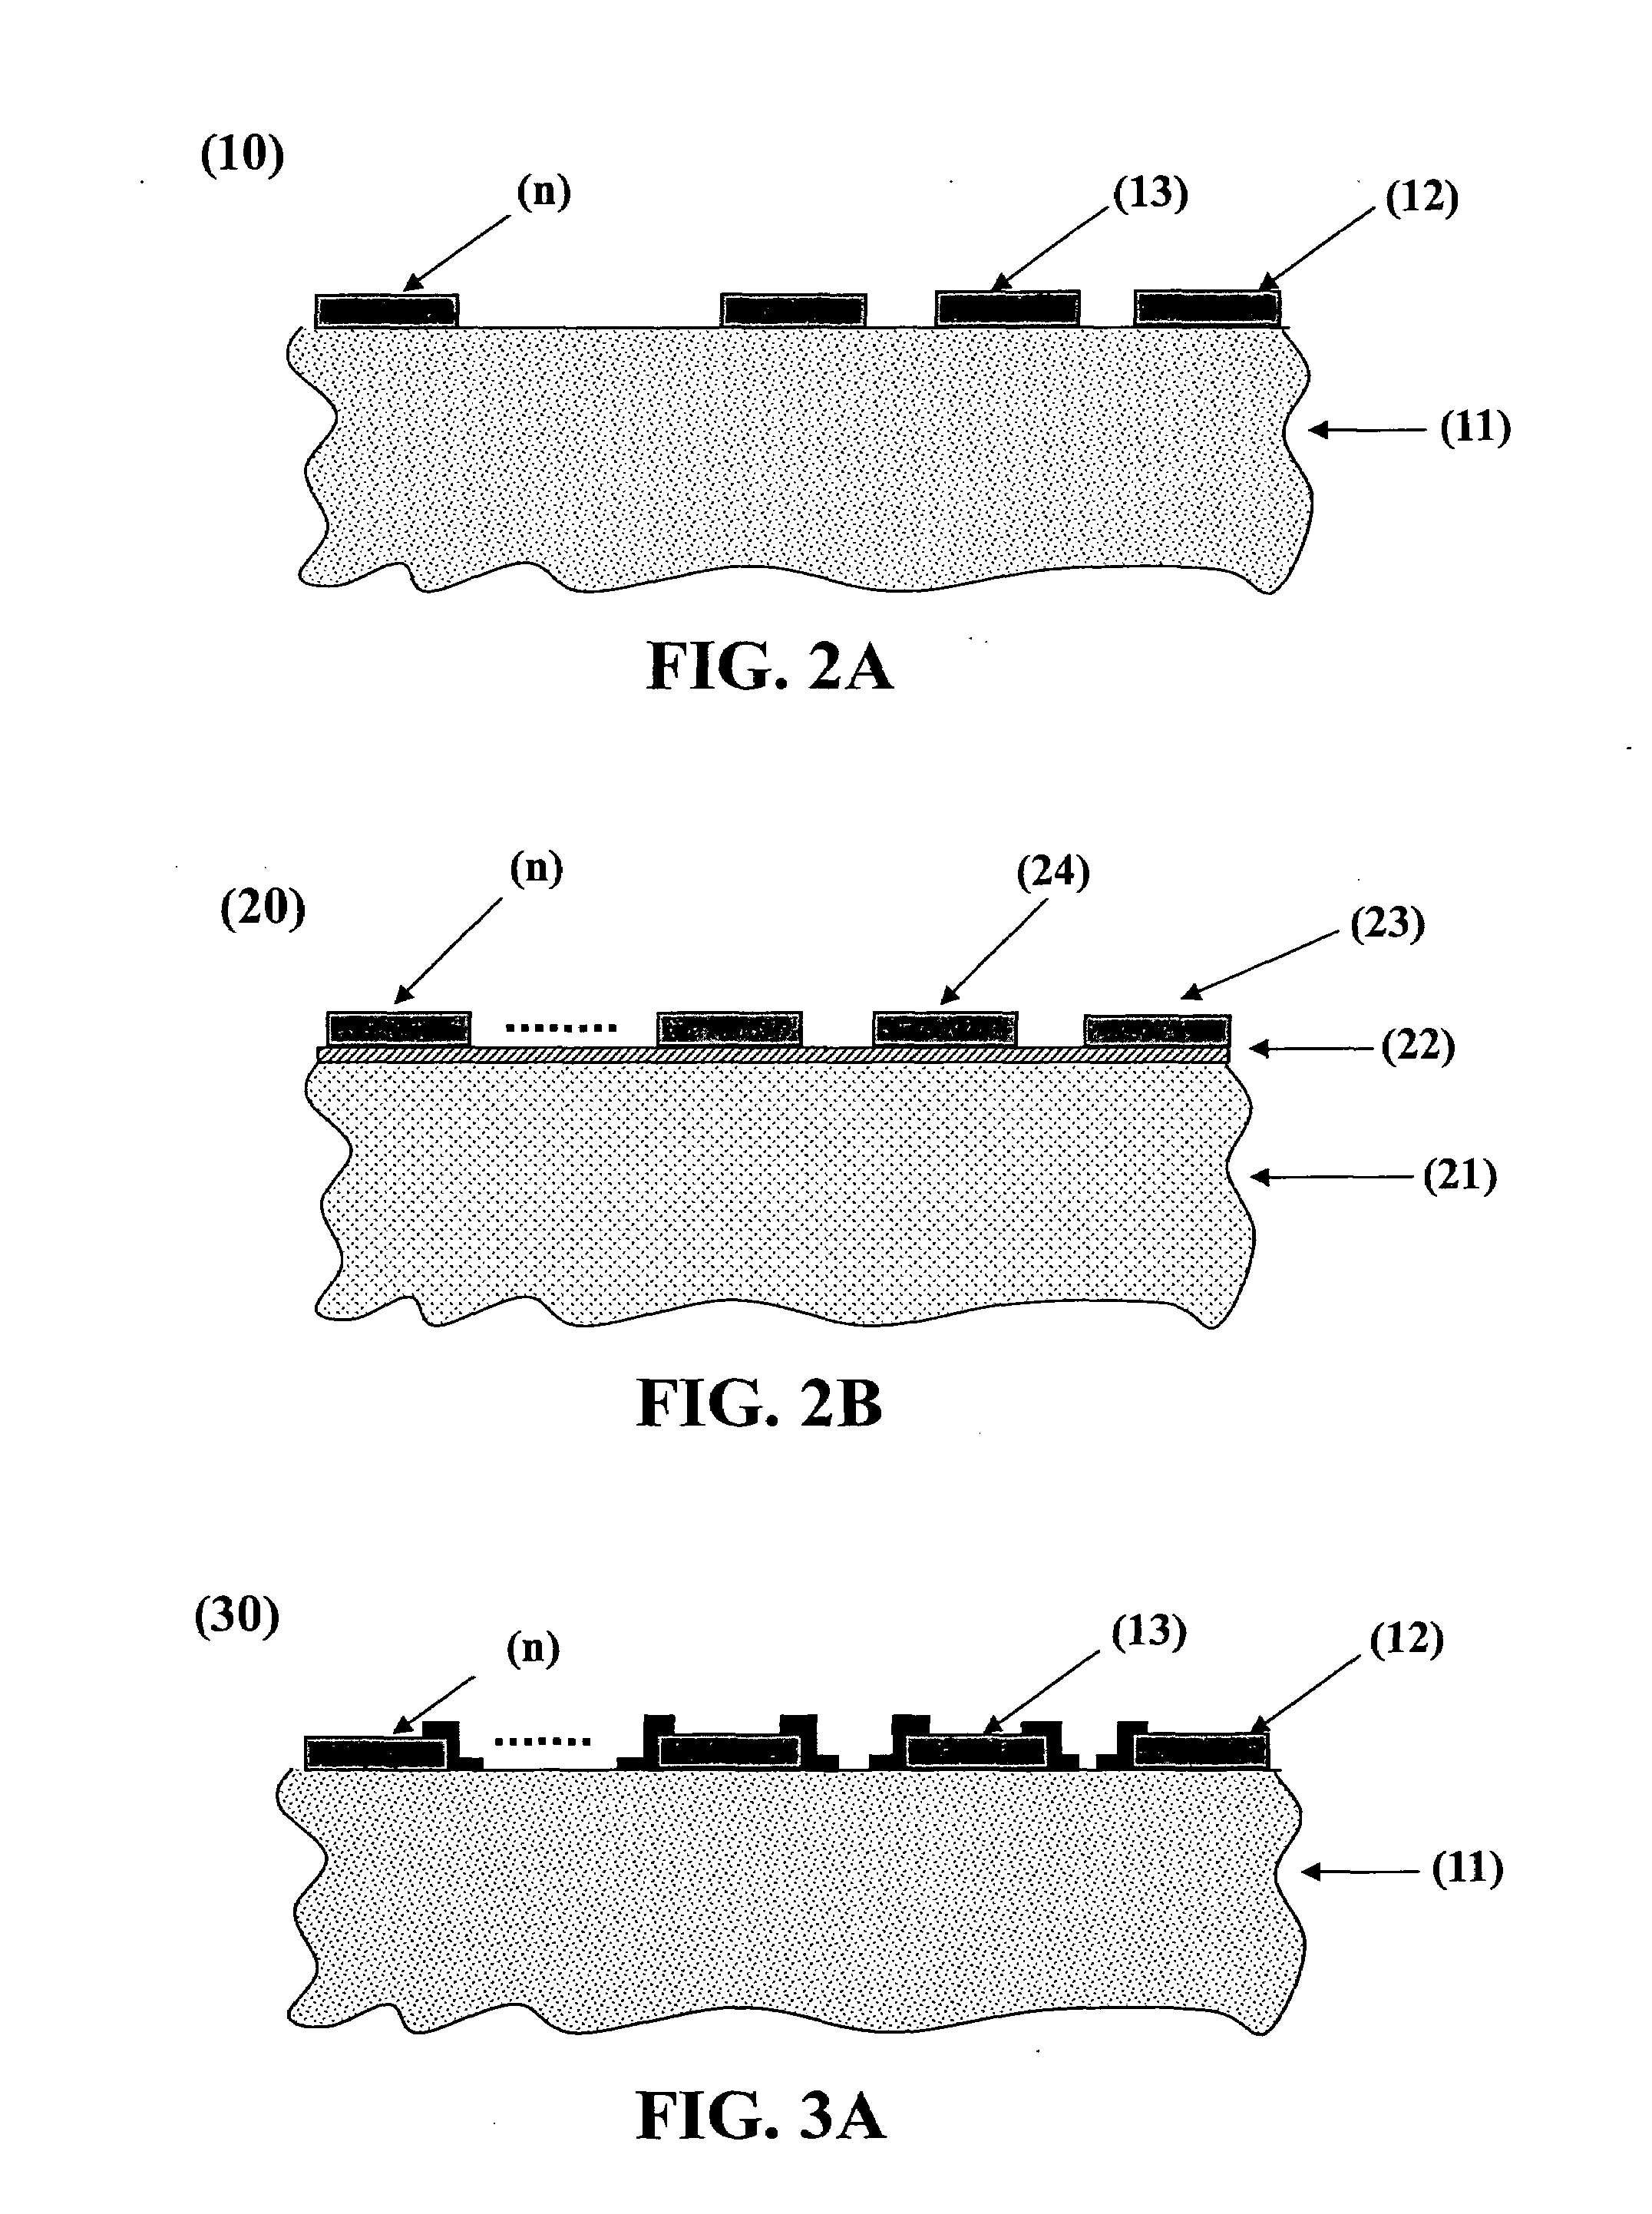 Method of Treating Non-Refrigerated, Spectrally-Selective Lead Selenide Infrared Detectors